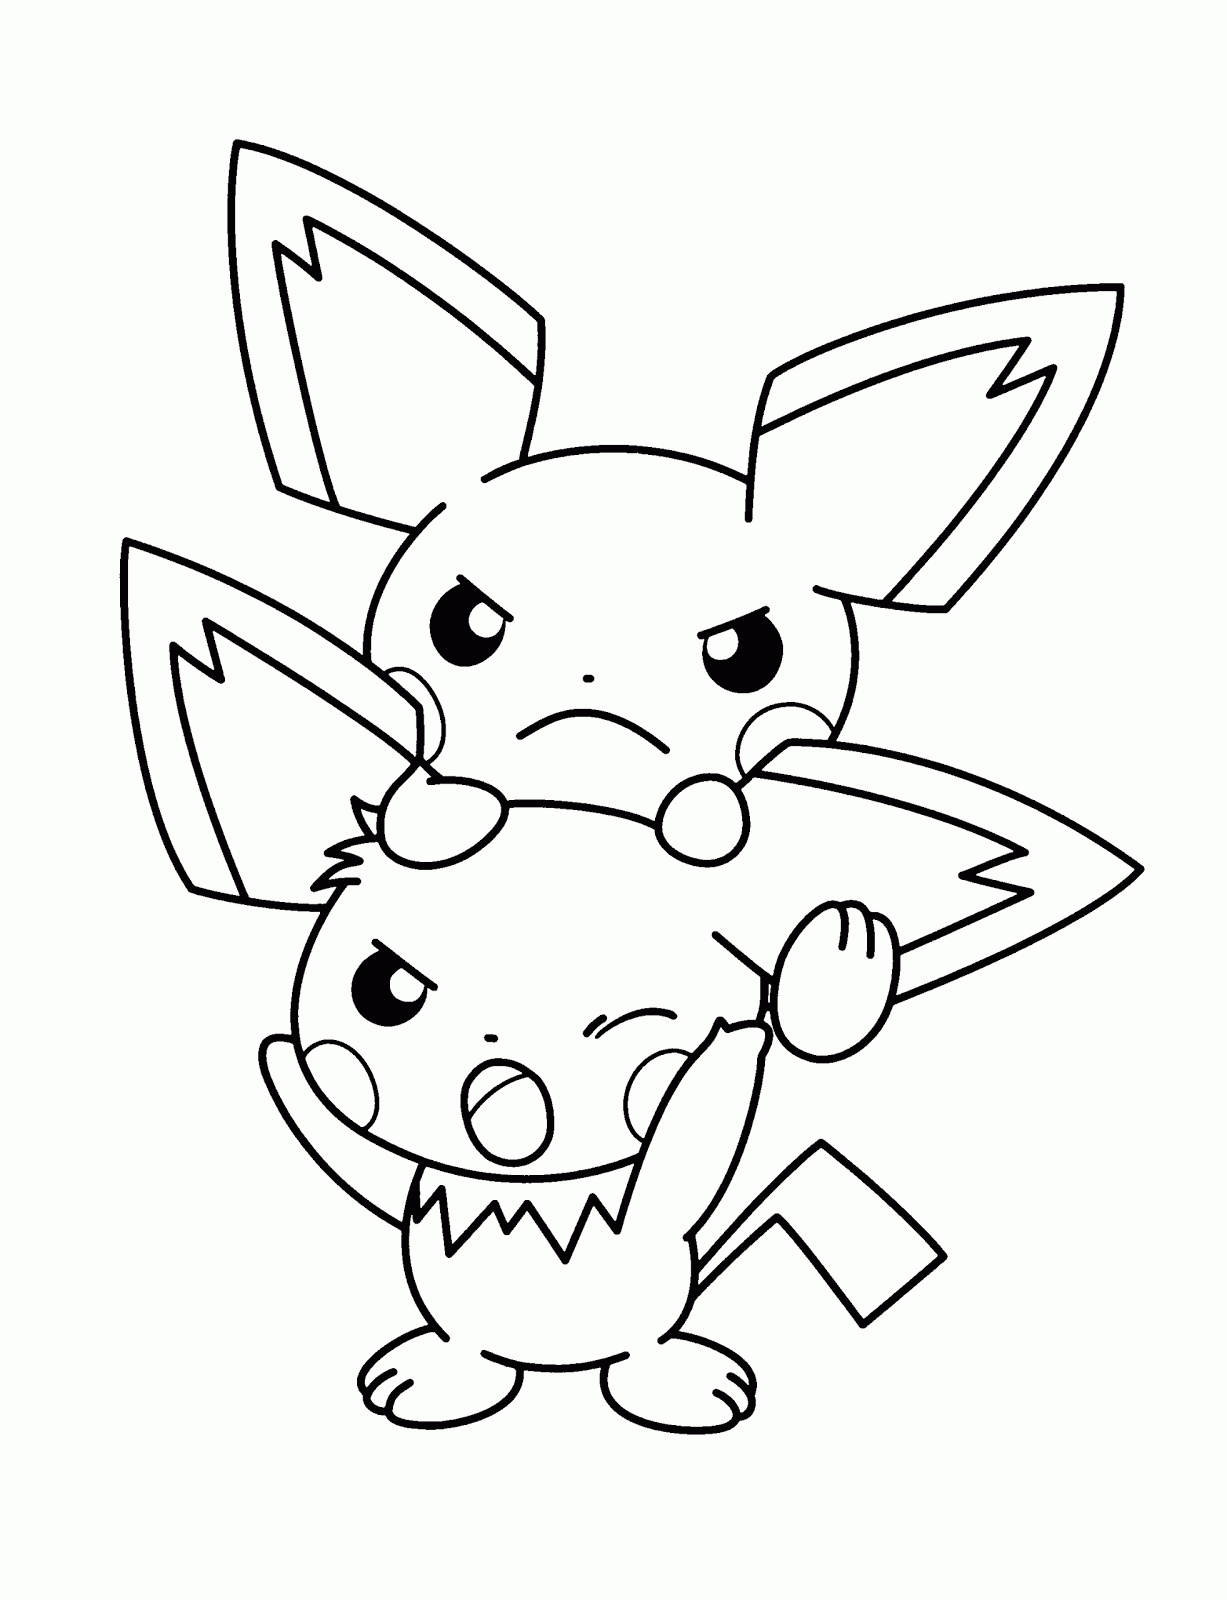 pokmon coloring pages pokemon coloring pages join your favorite pokemon on an pages coloring pokmon 